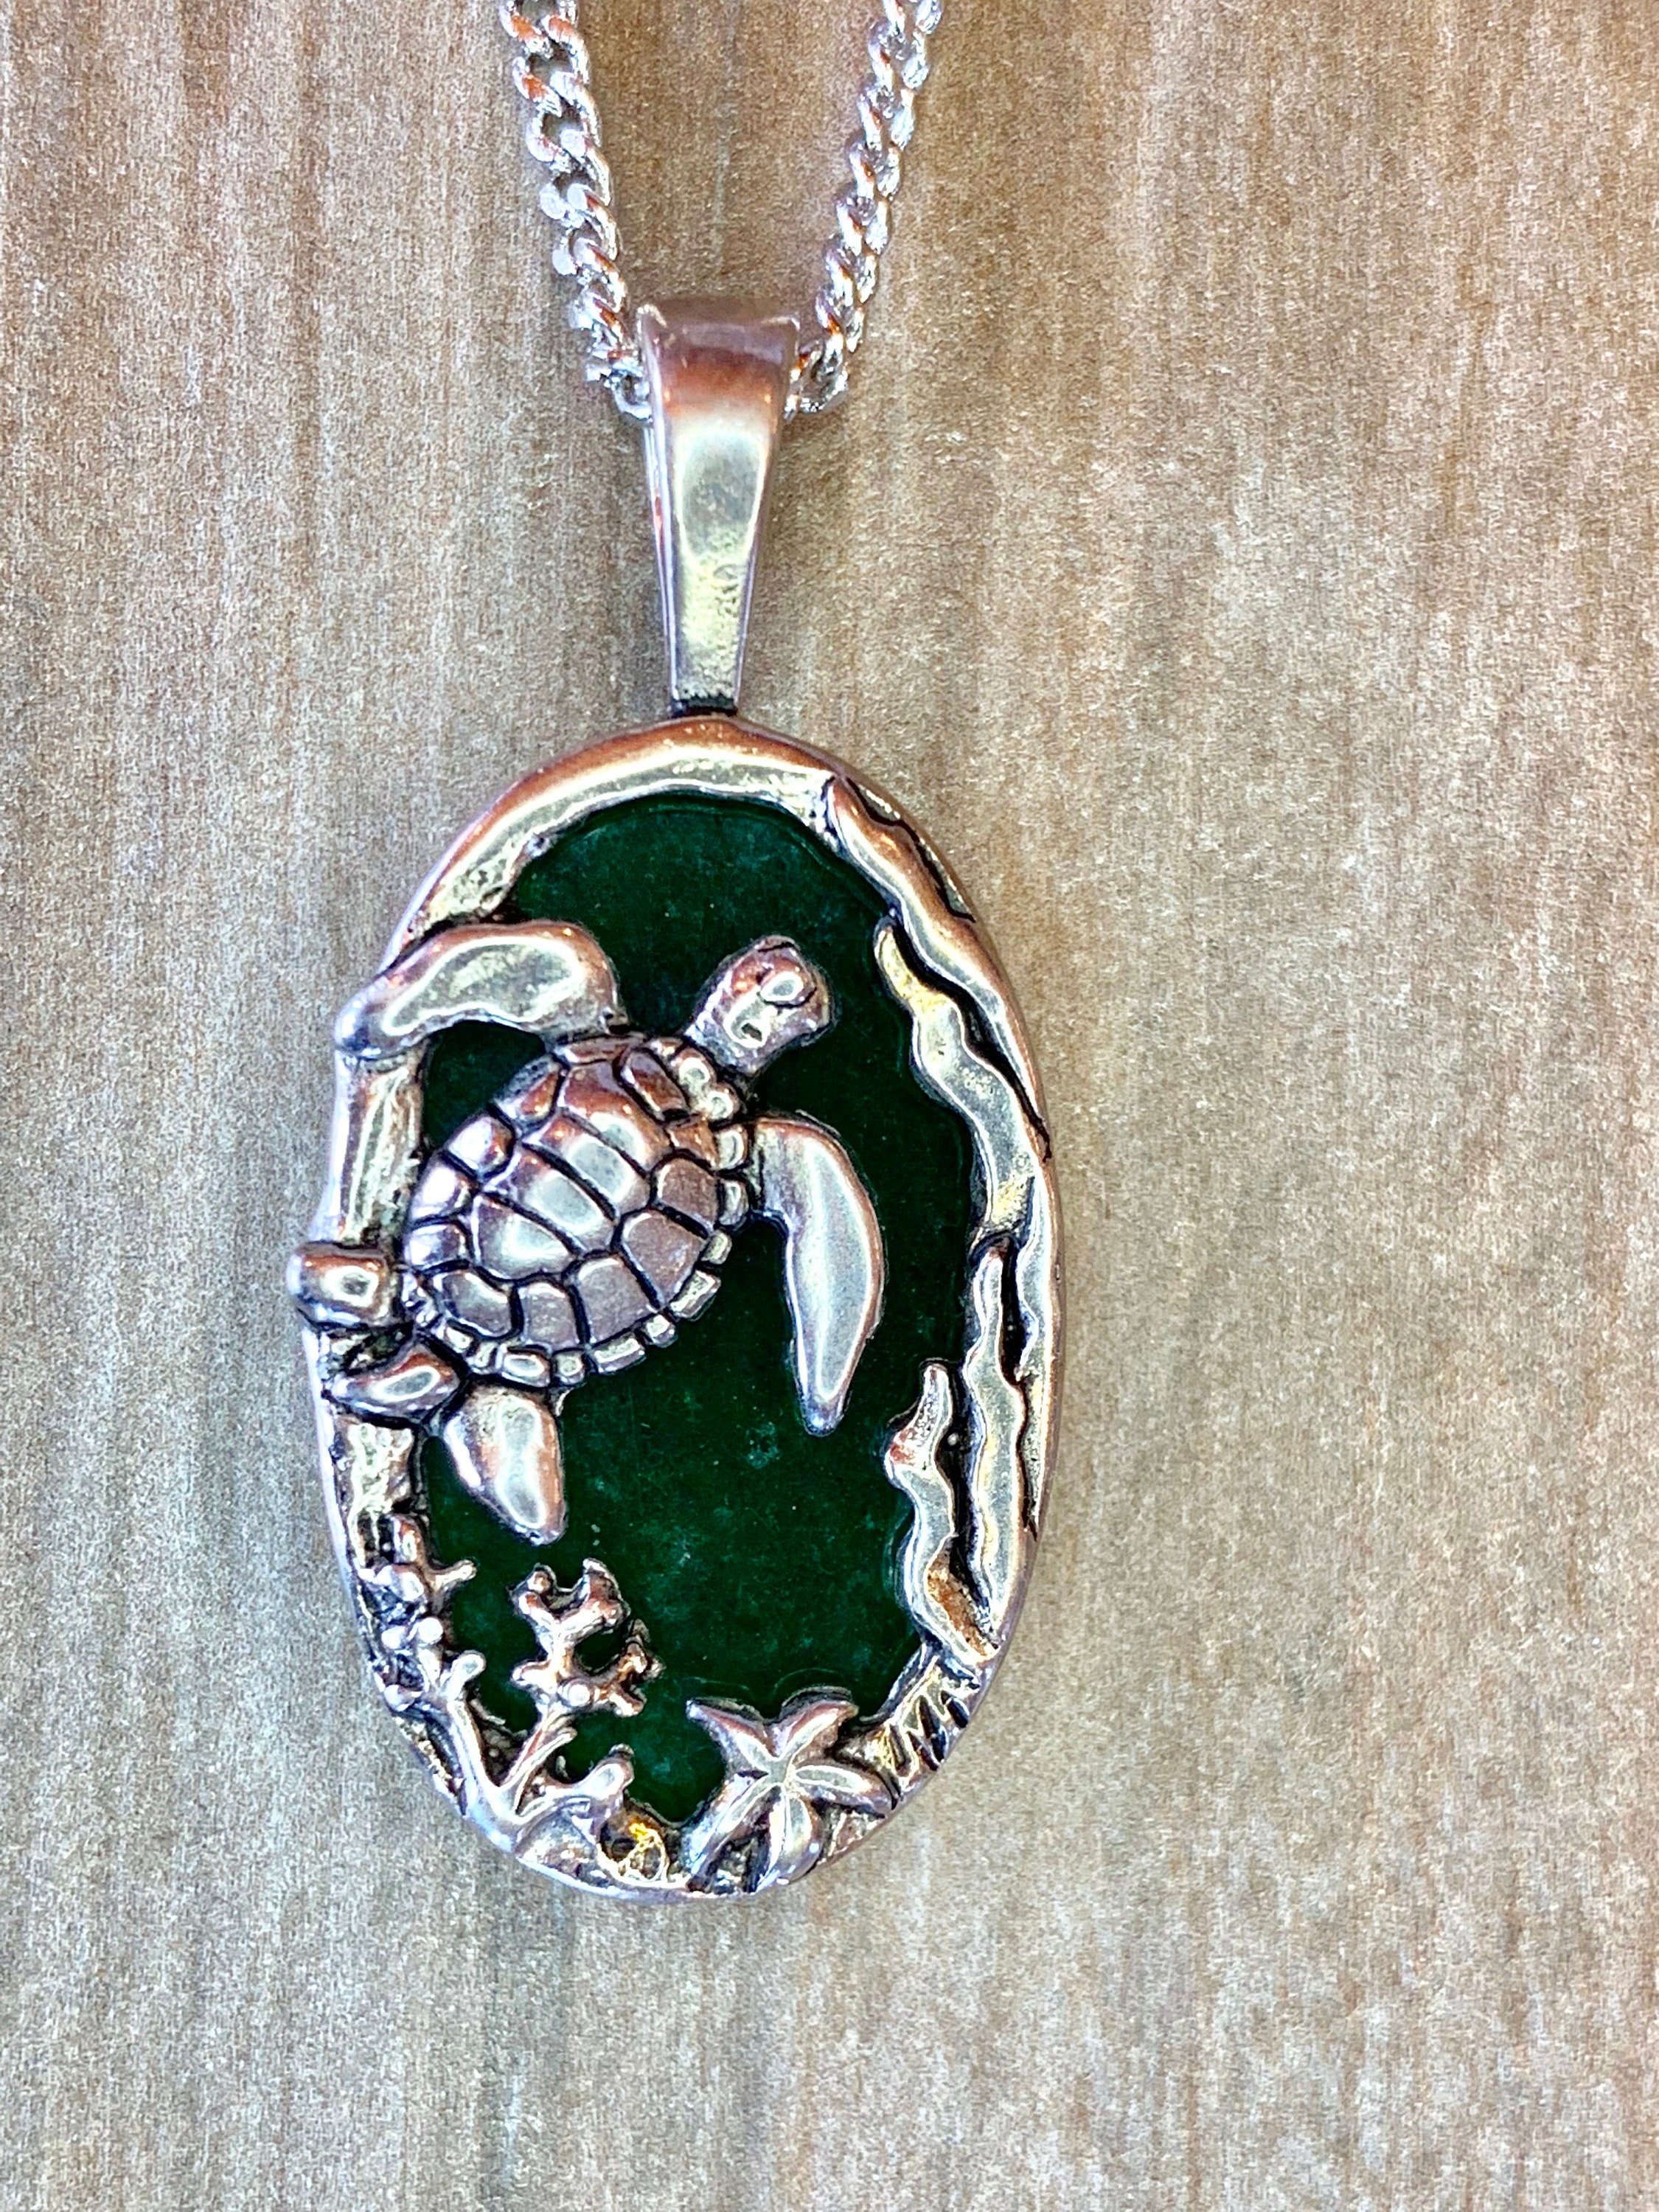 Turtle Scenic Silhouettes Necklace N10097DG by Lois Wagner - Etsy